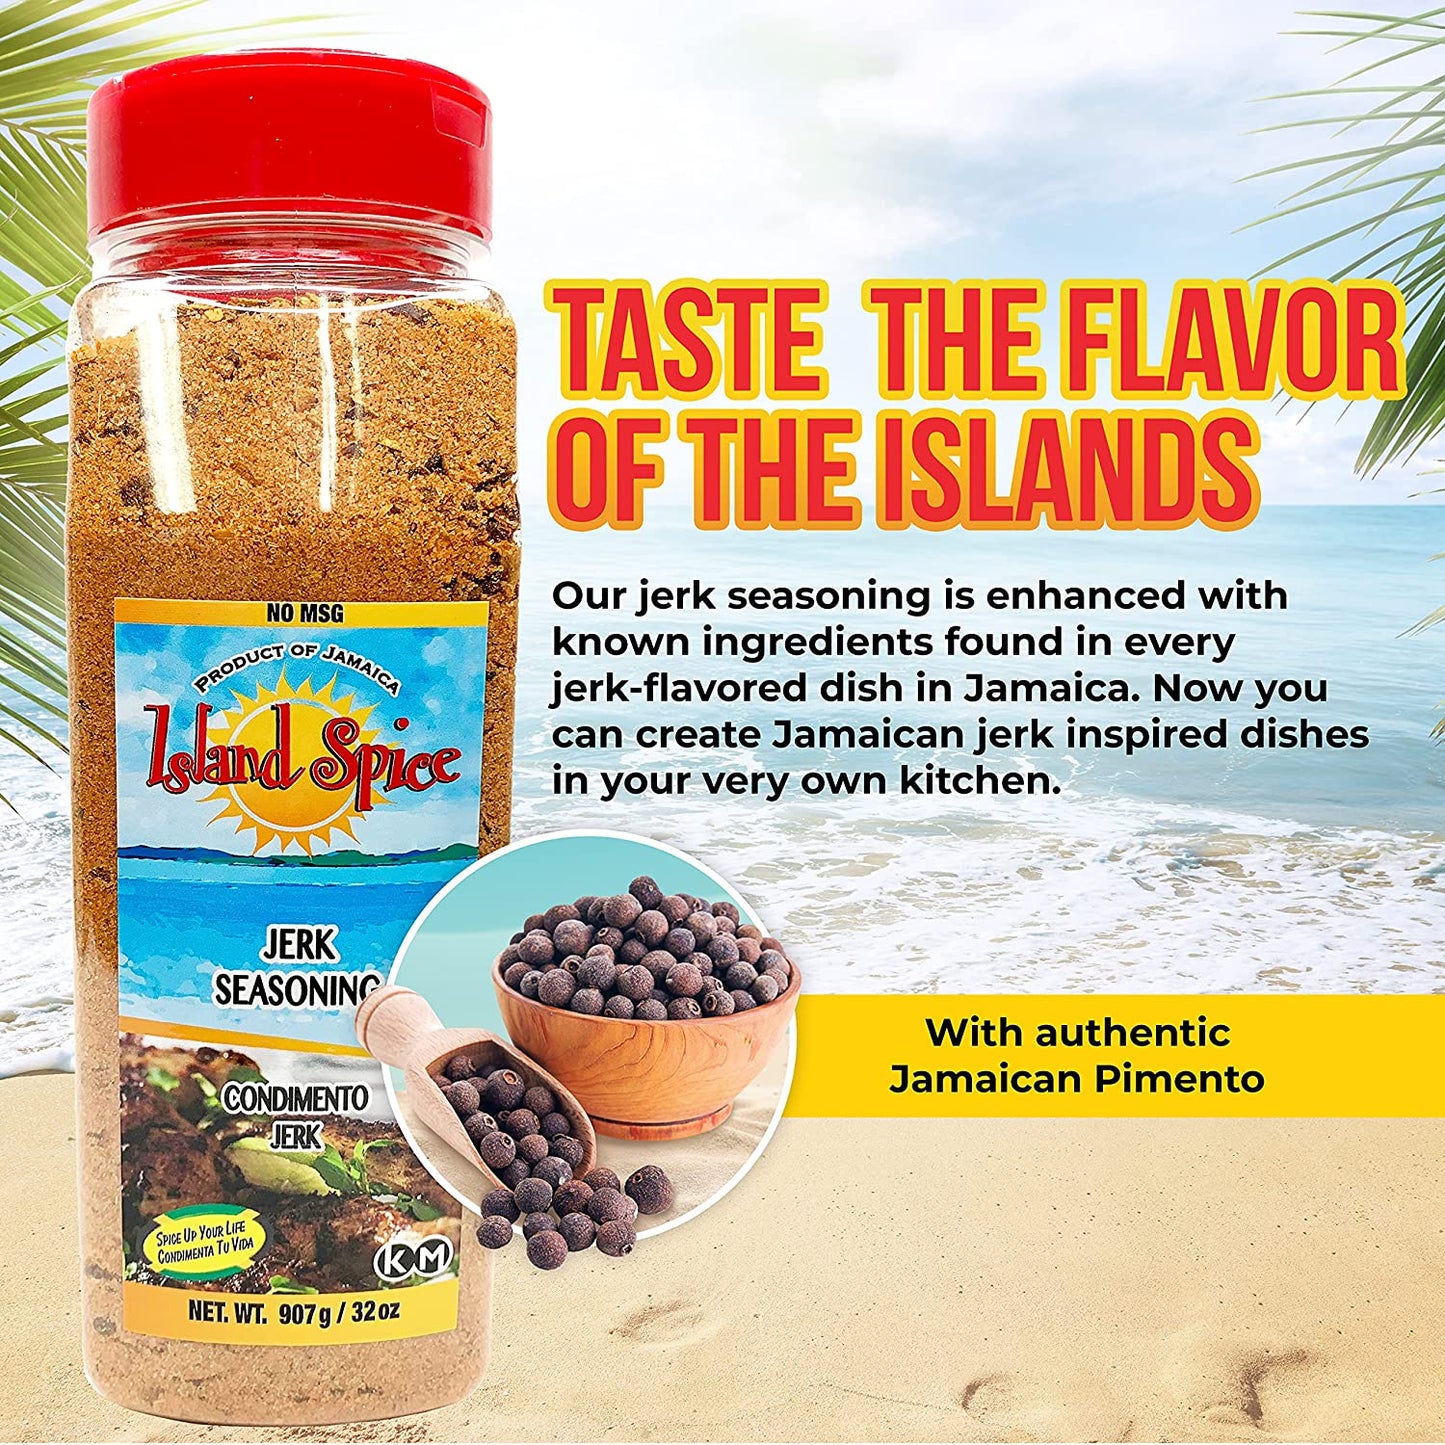 Island Spice Jerk Seasoning 32 ounces - Gluten-Free Vegan-Friendly Dry Rub with Real Jamaican Pimento - Authentic Jerk Flavors and Spice Blend - Use on Chicken, Pork, Beef, Seafood, and Vegan Dishes